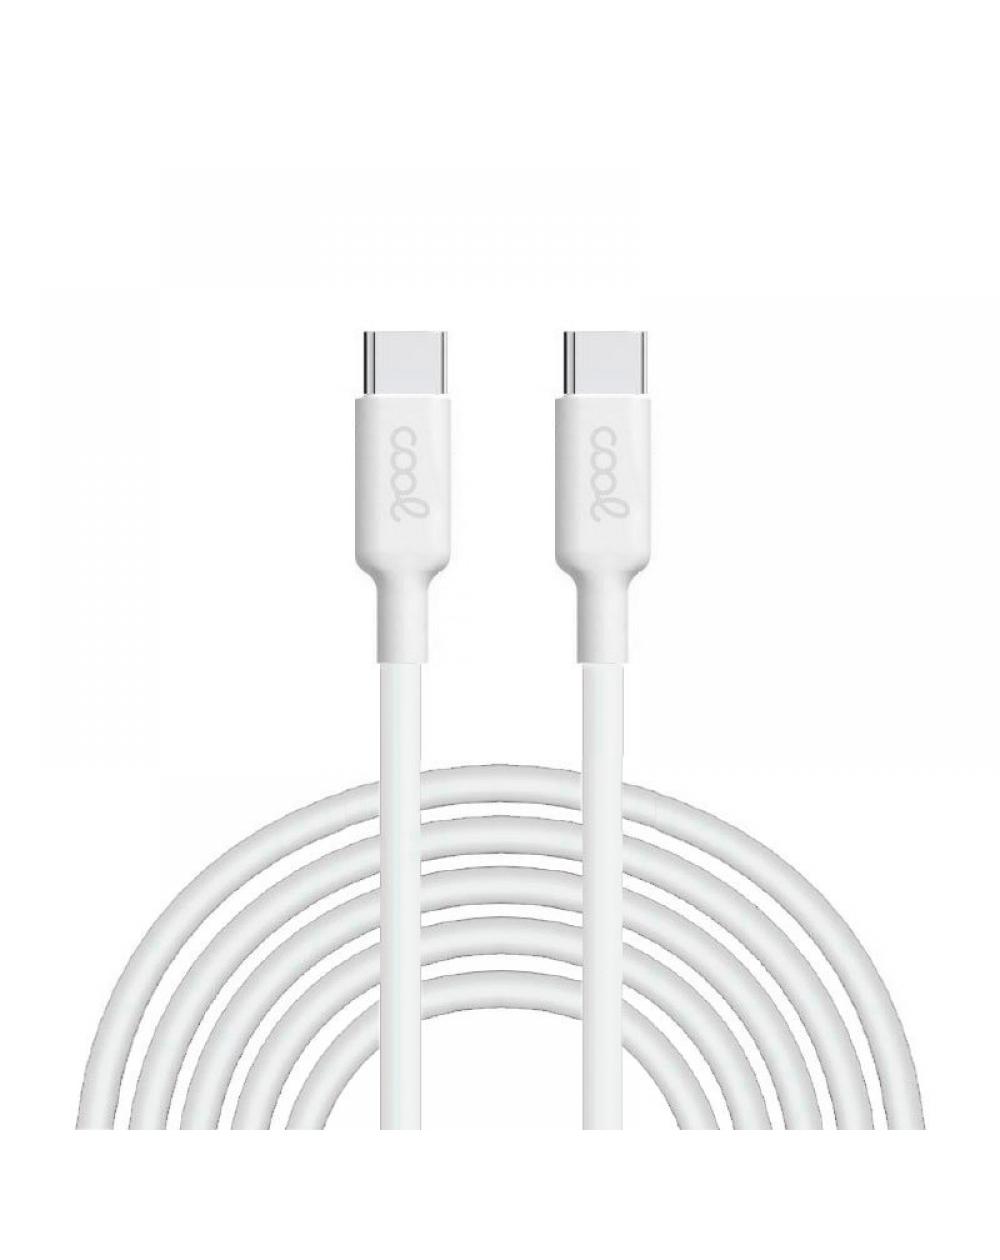 Cable USB Compatible COOL Universal TIPO-C a TIPO-C (3 metro) Blanco 3 Amp